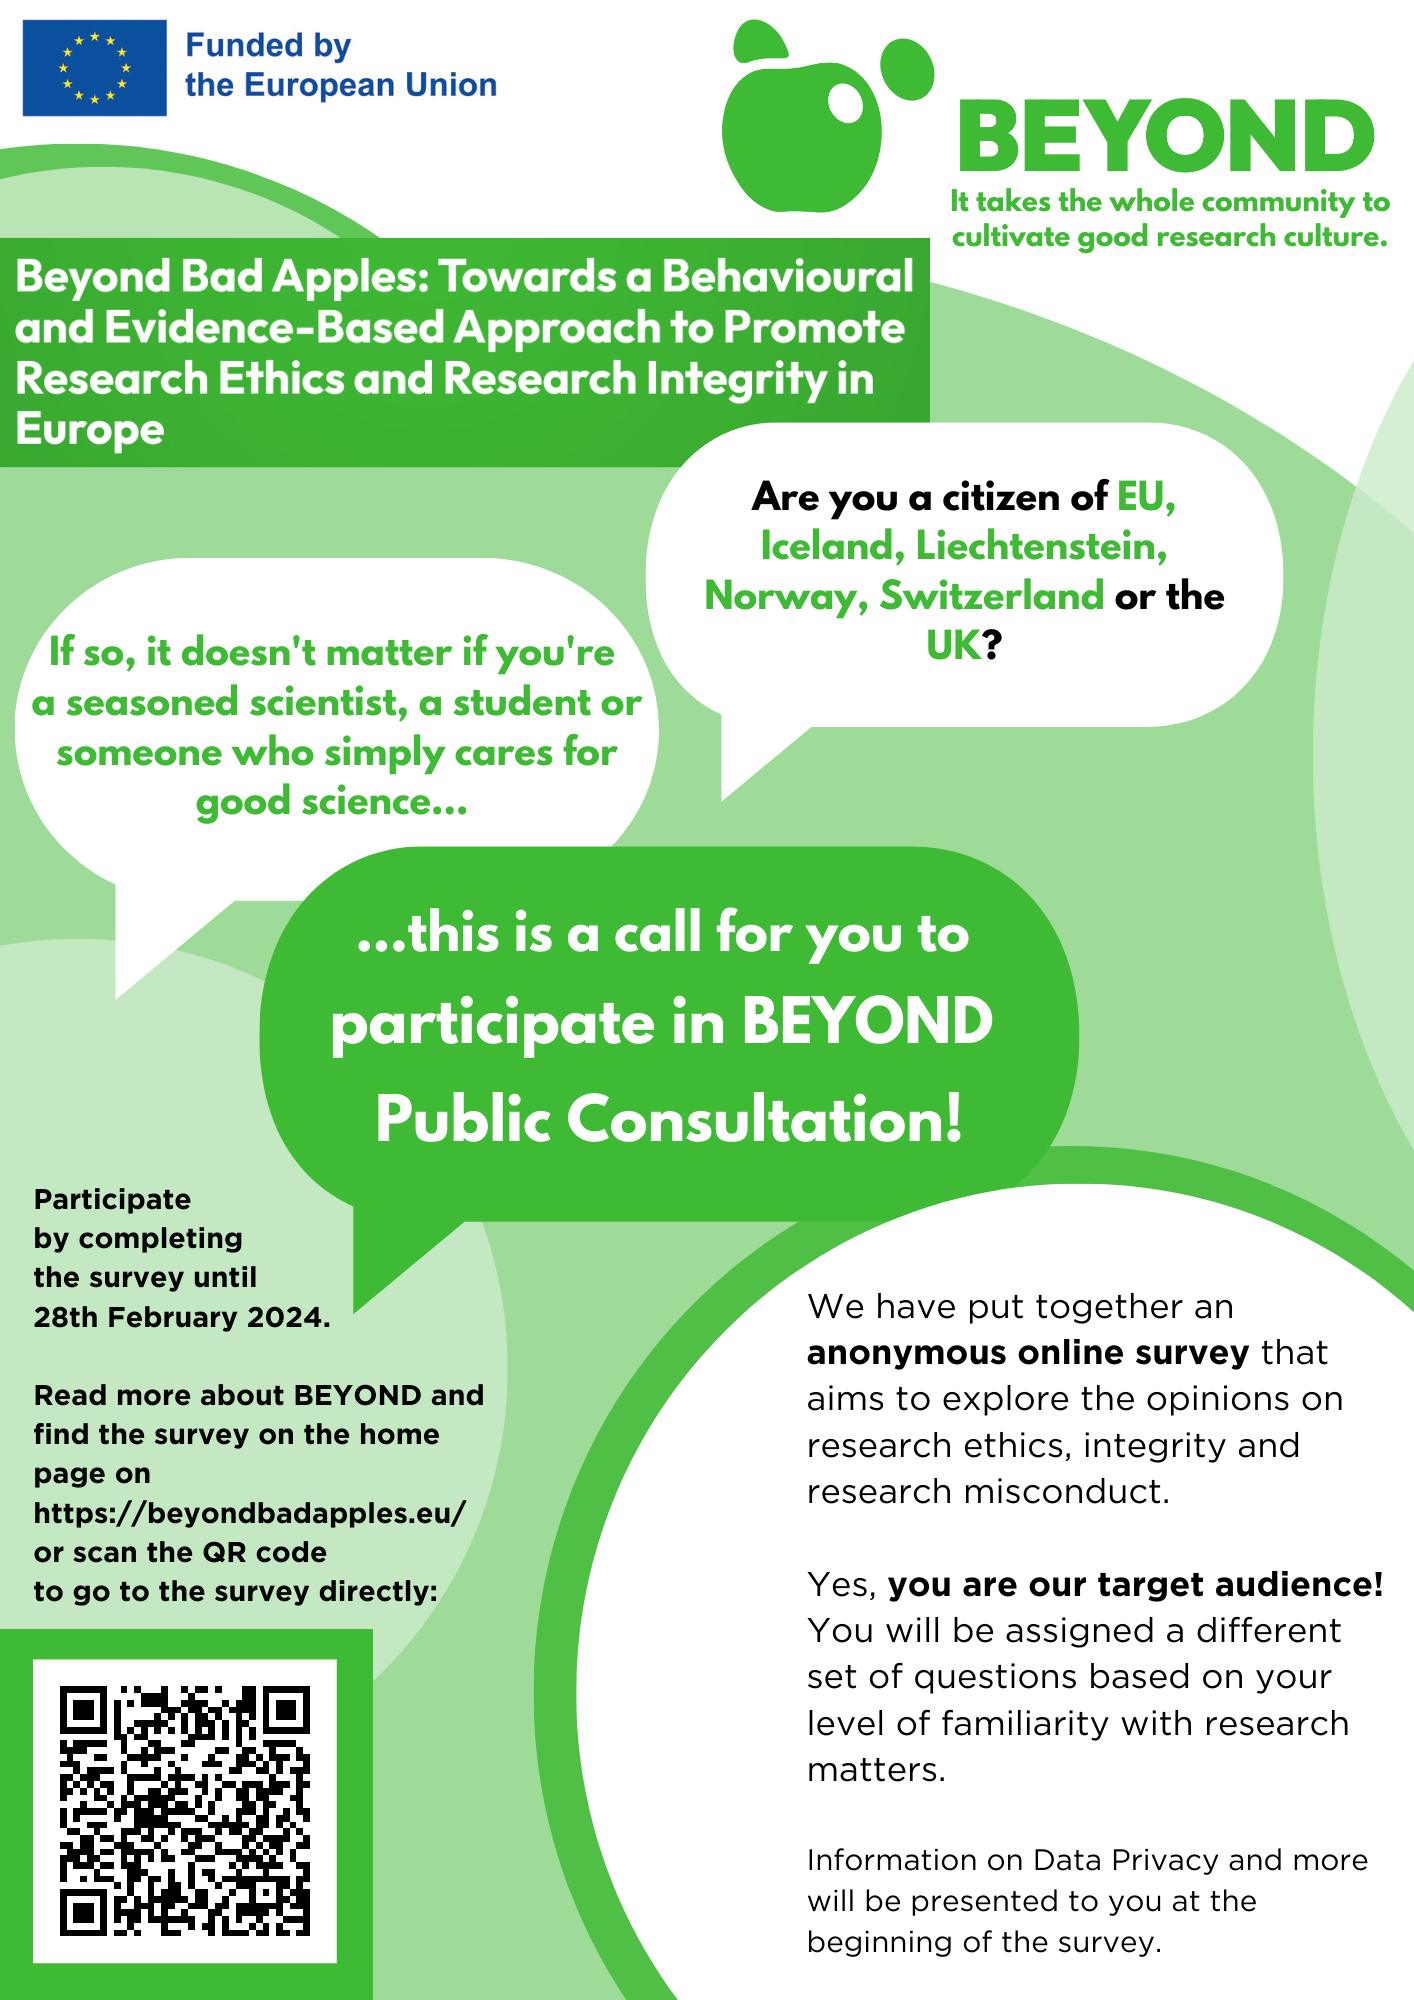 This-is-a-call-to-participate-in-BEYOND-Public-Consultation